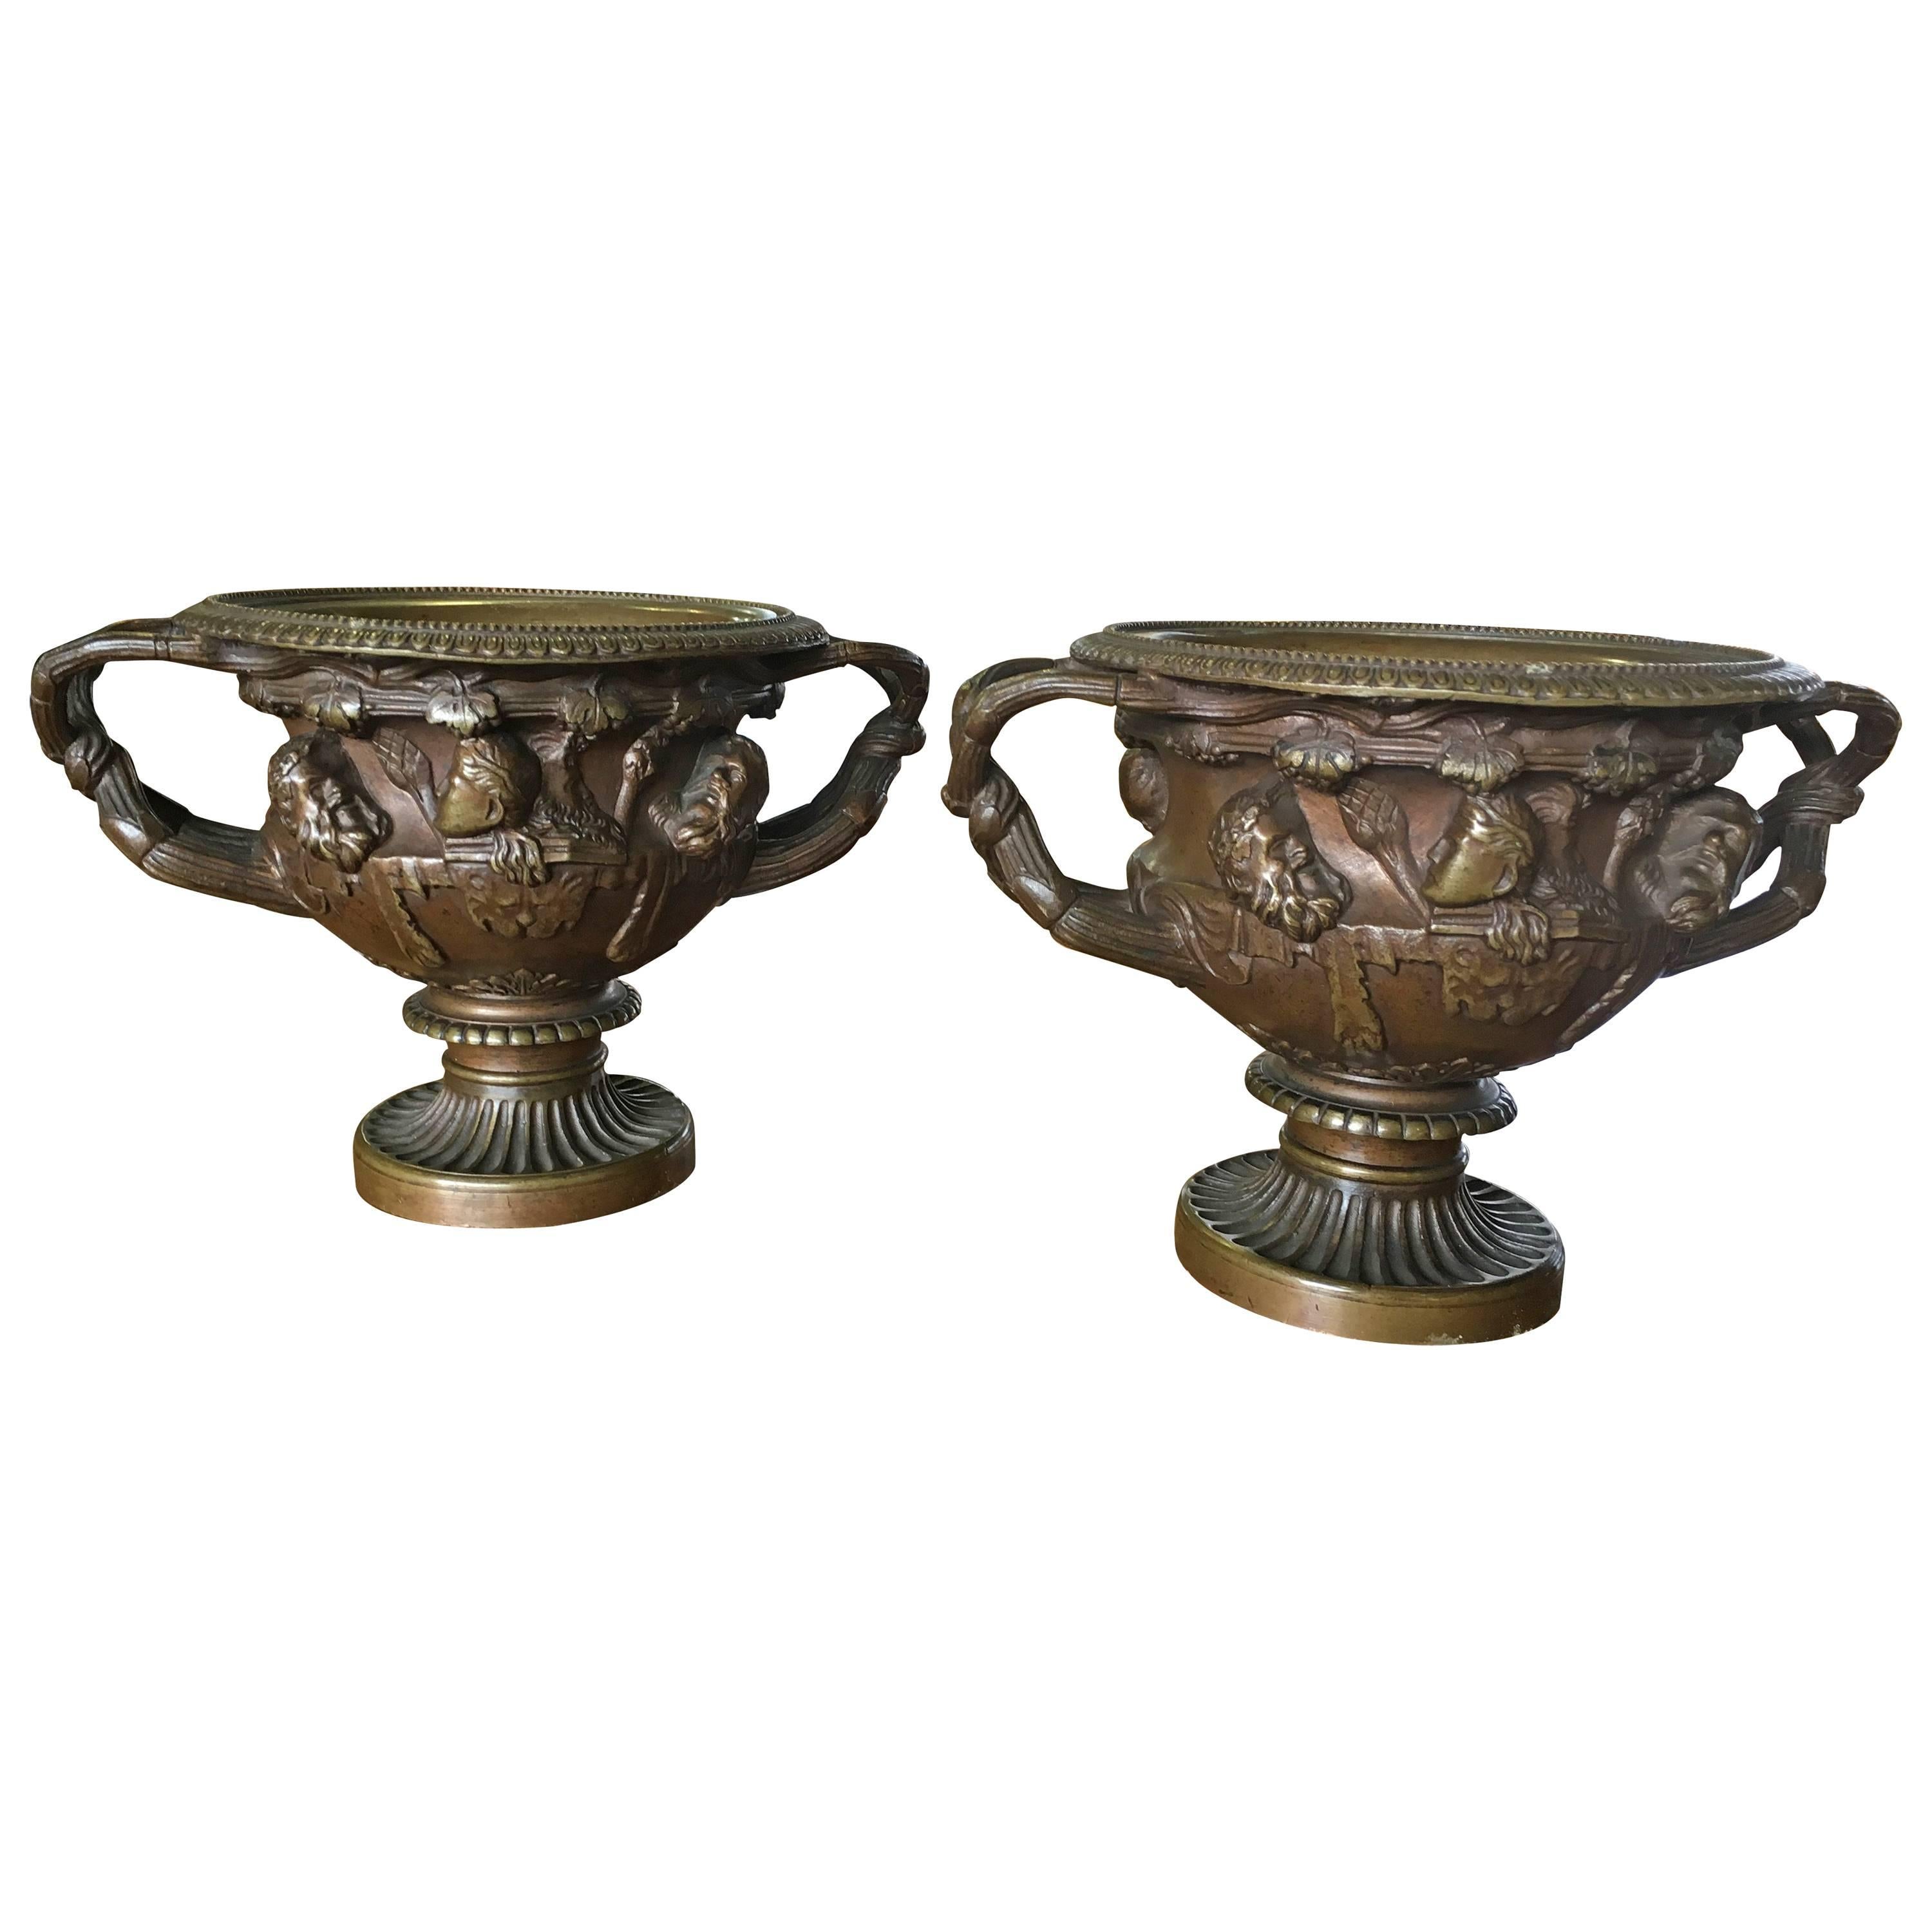 19th Century Pair of French Bronze Vases by F. Barbedienne